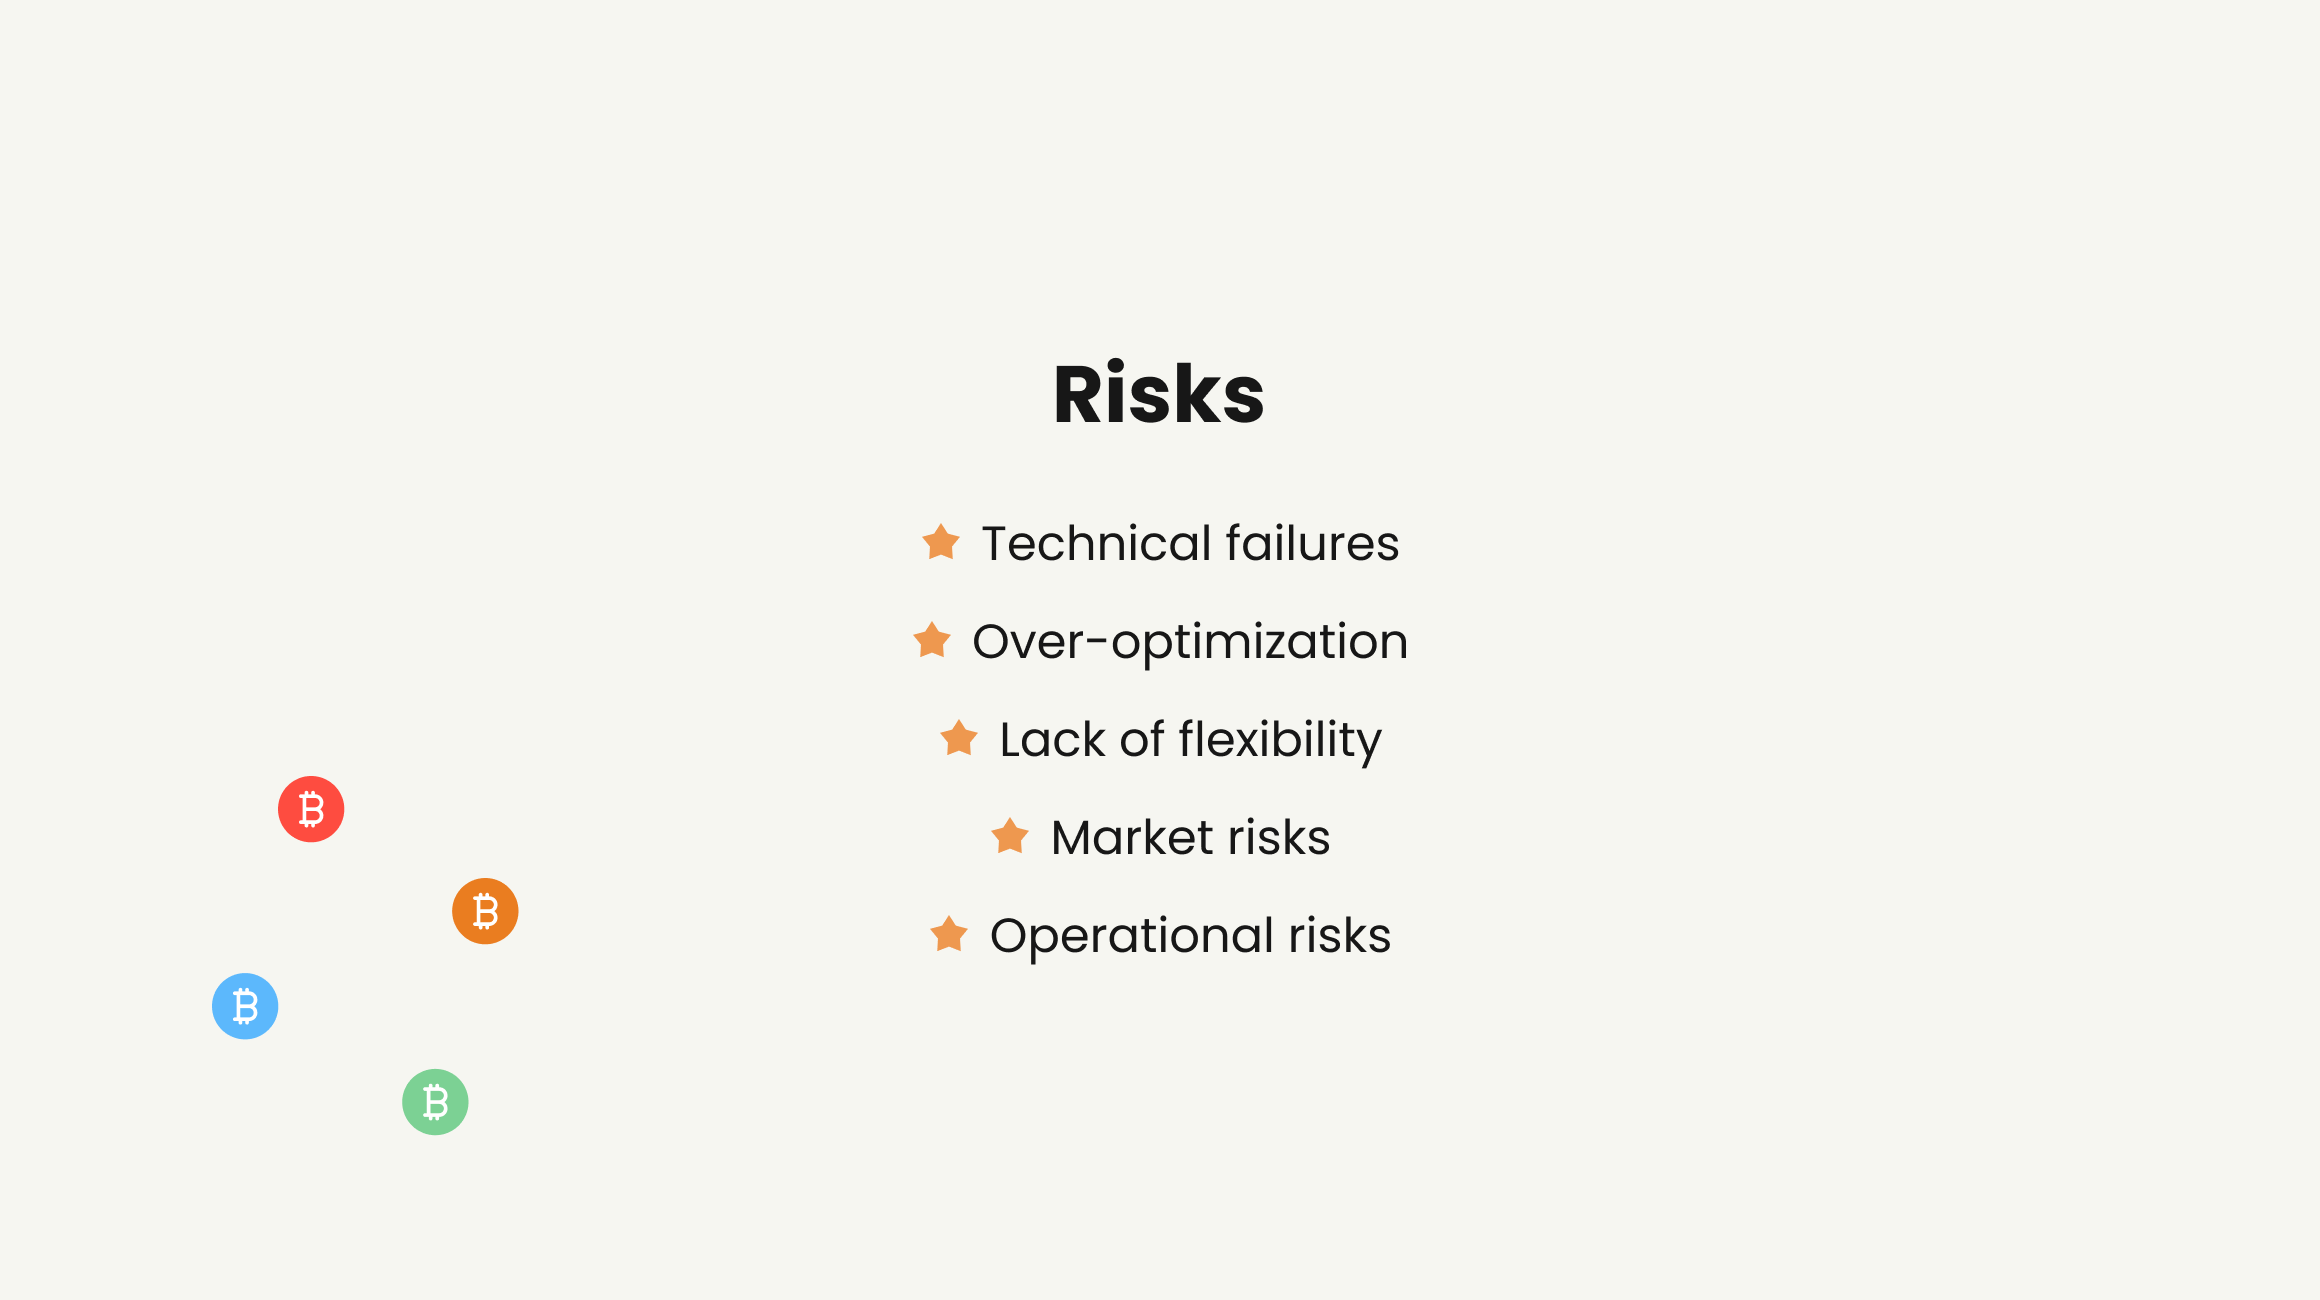 Risks associated with trading bots